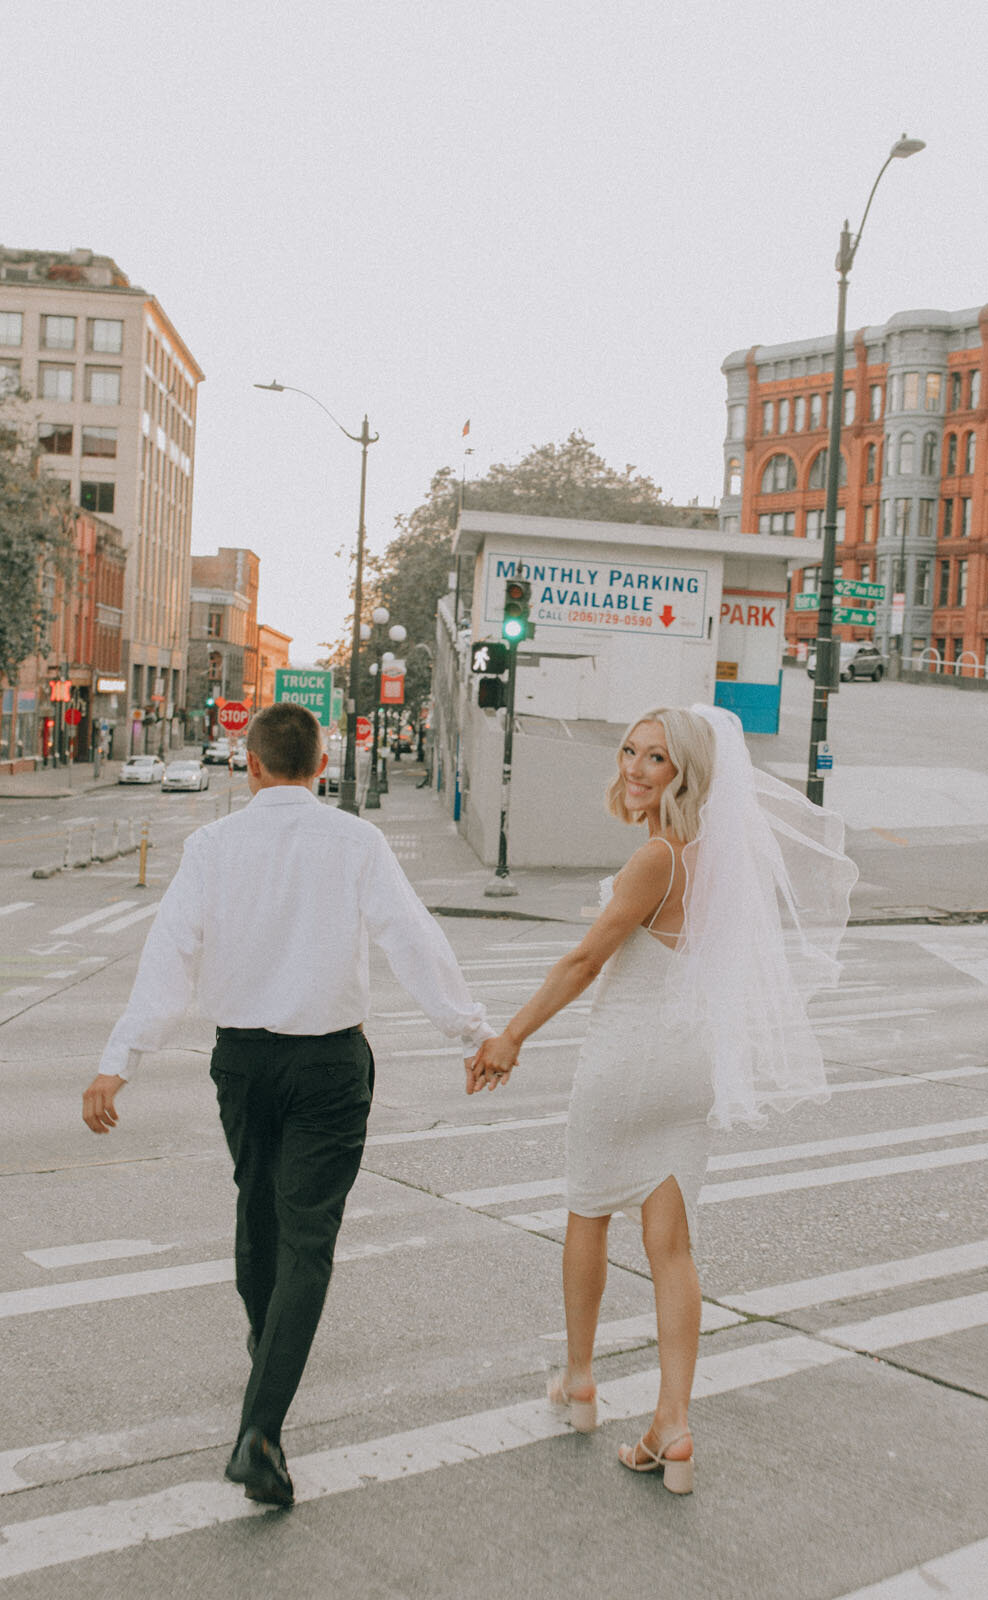 Couple crossing the street while bride looks back over her shoulder